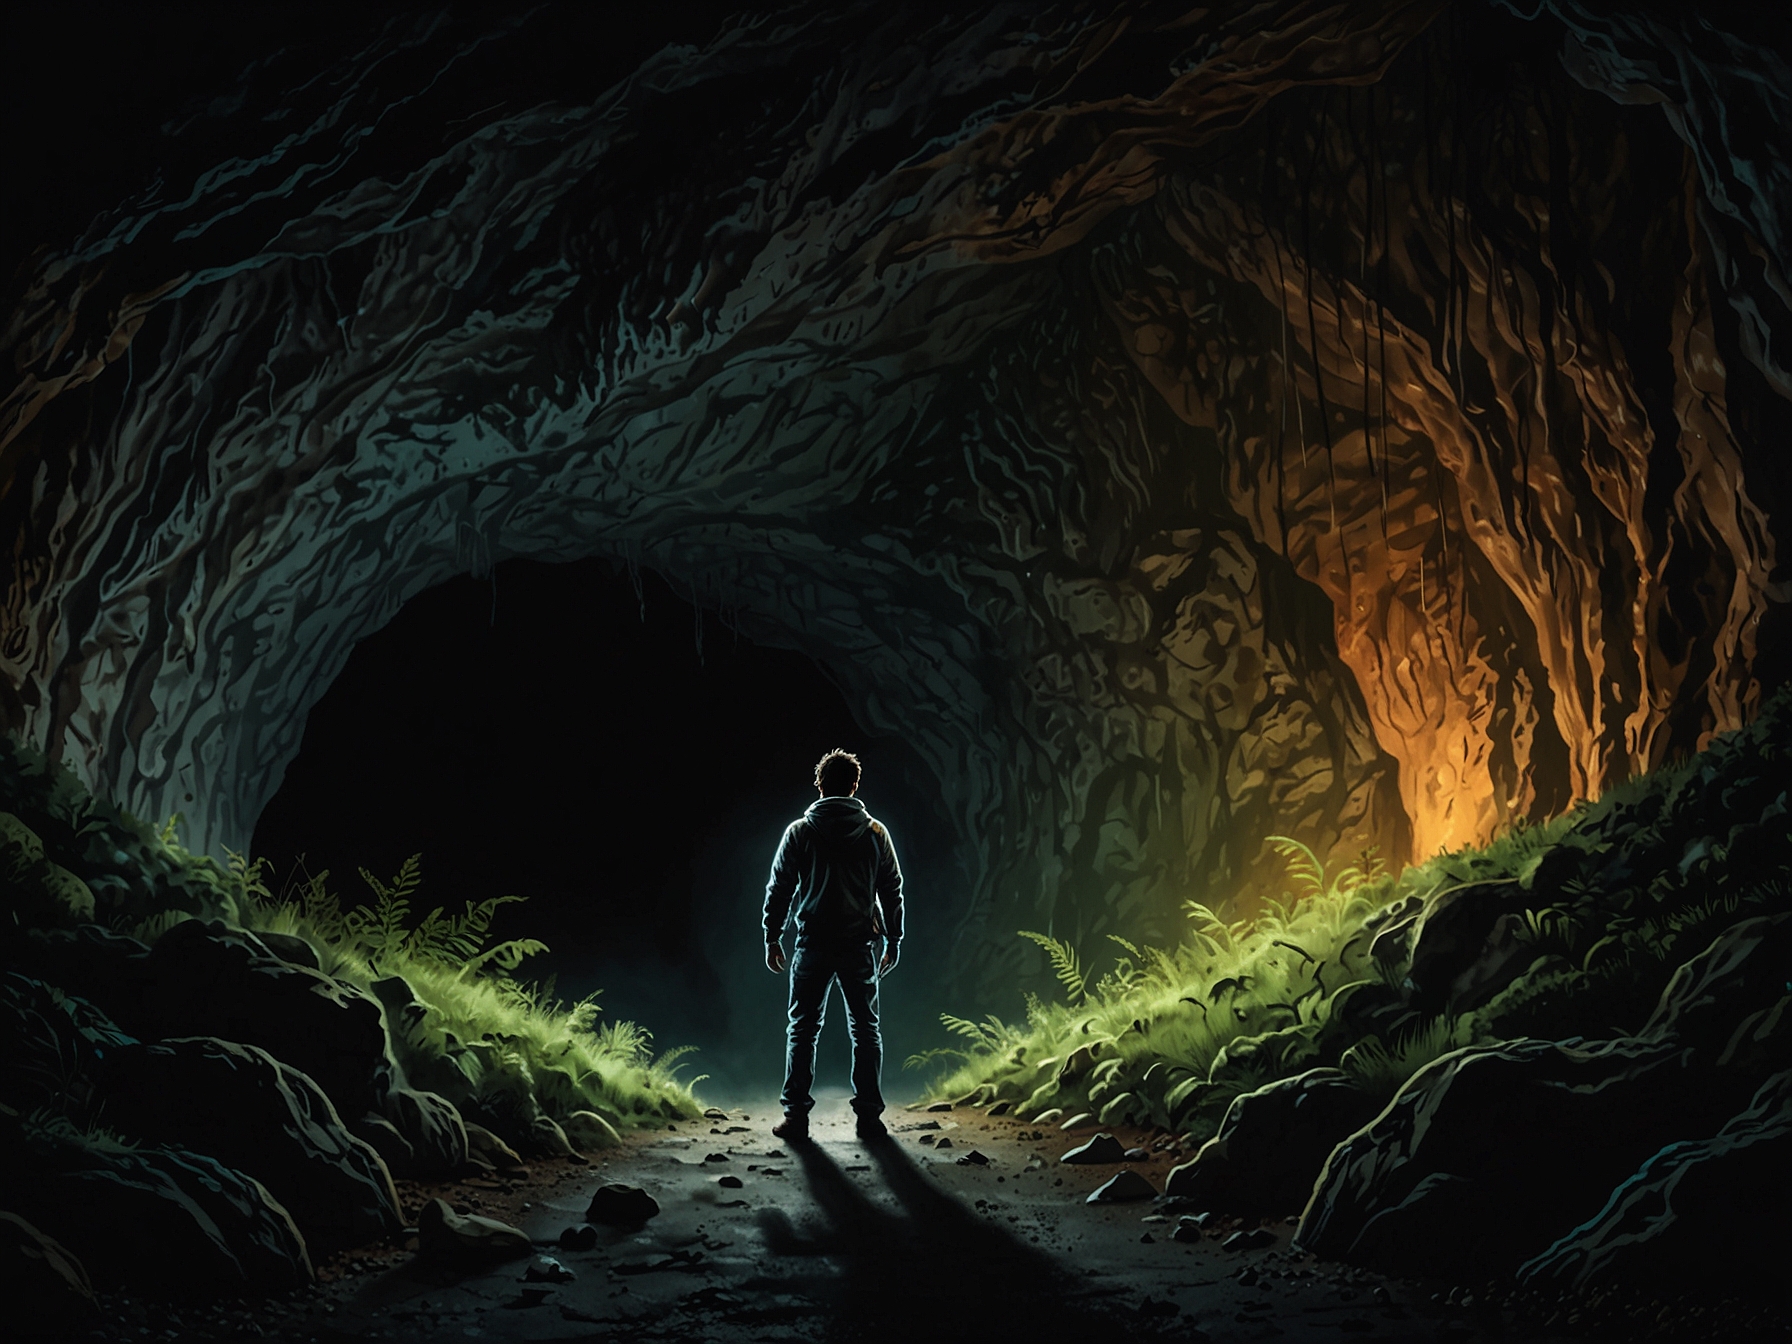 MrBeast, standing at the entrance of the Waitomo Caves, prepares for an exciting exploration. The cave’s natural beauty is illuminated by a soft, ambient light, capturing the anticipation of the adventure.